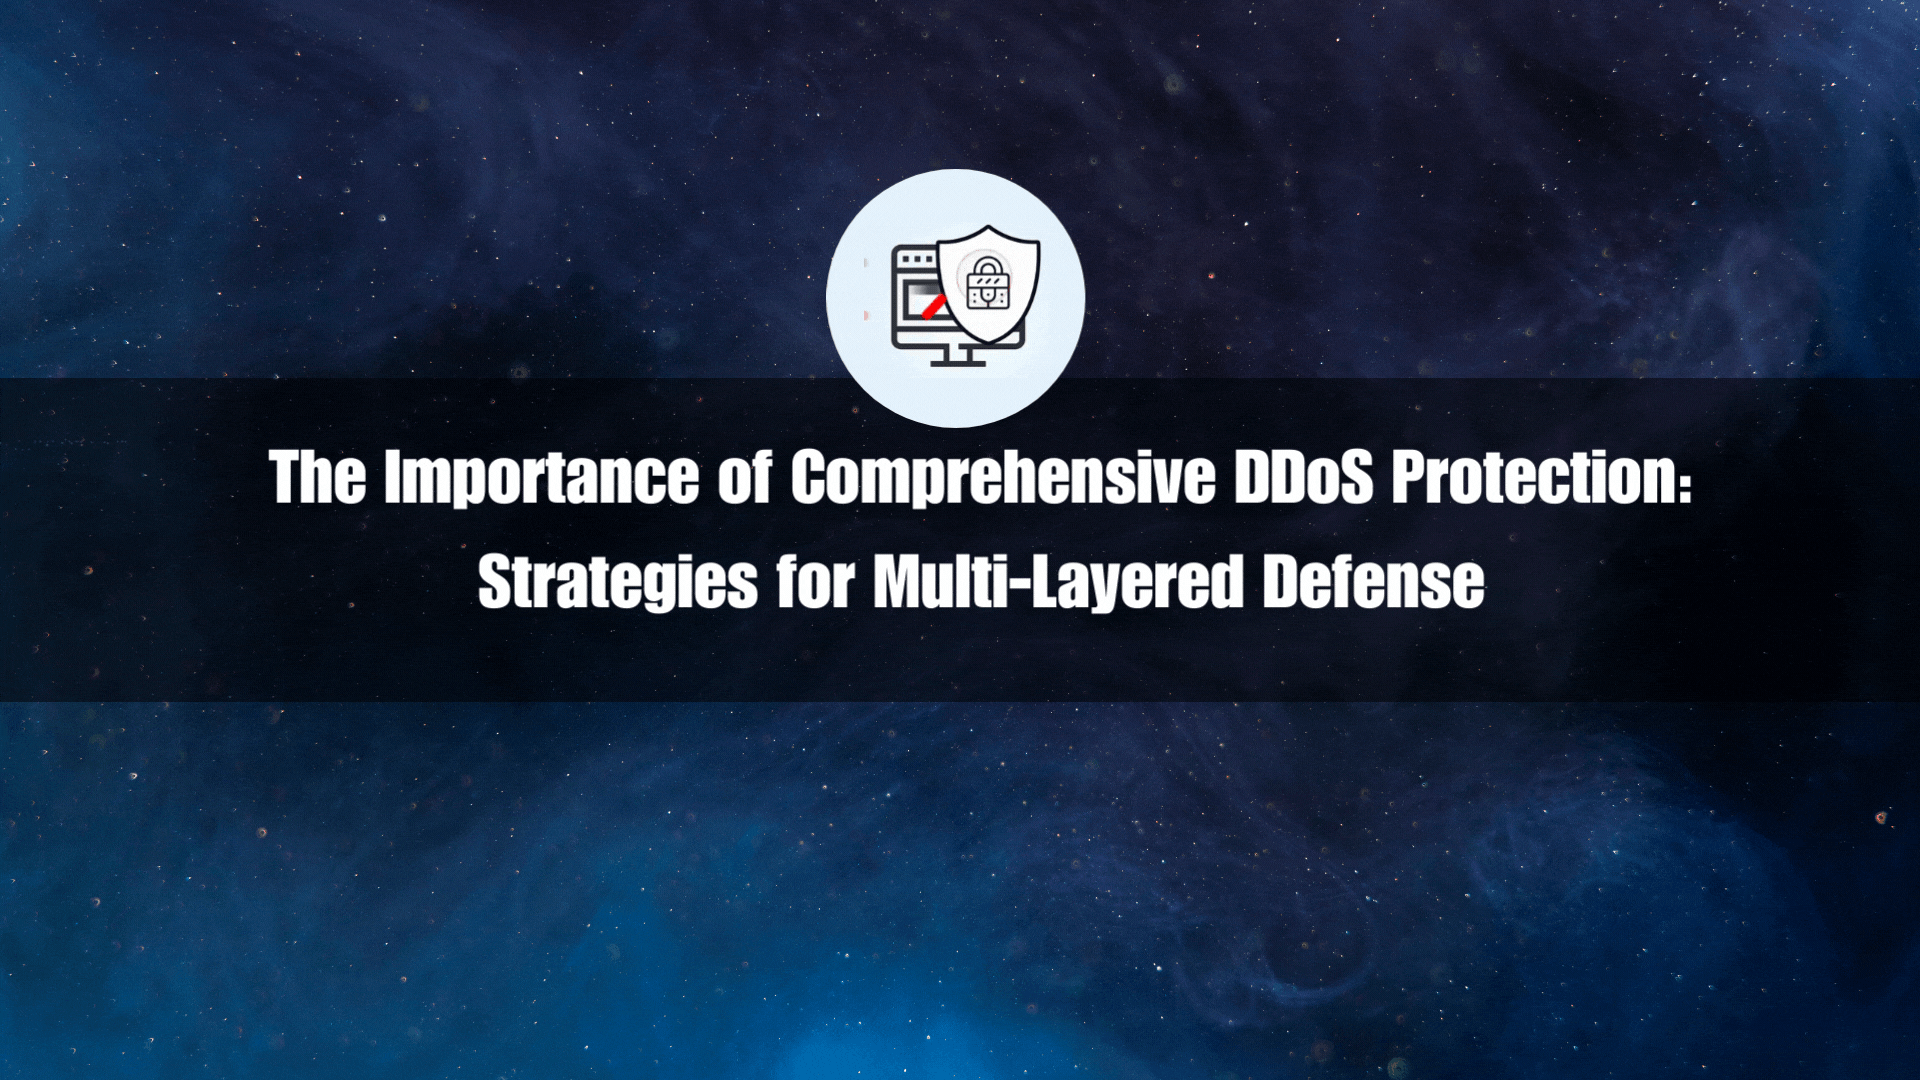 The Importance of Comprehensive DDoS Protection Strategies for Multi-Layered Defense